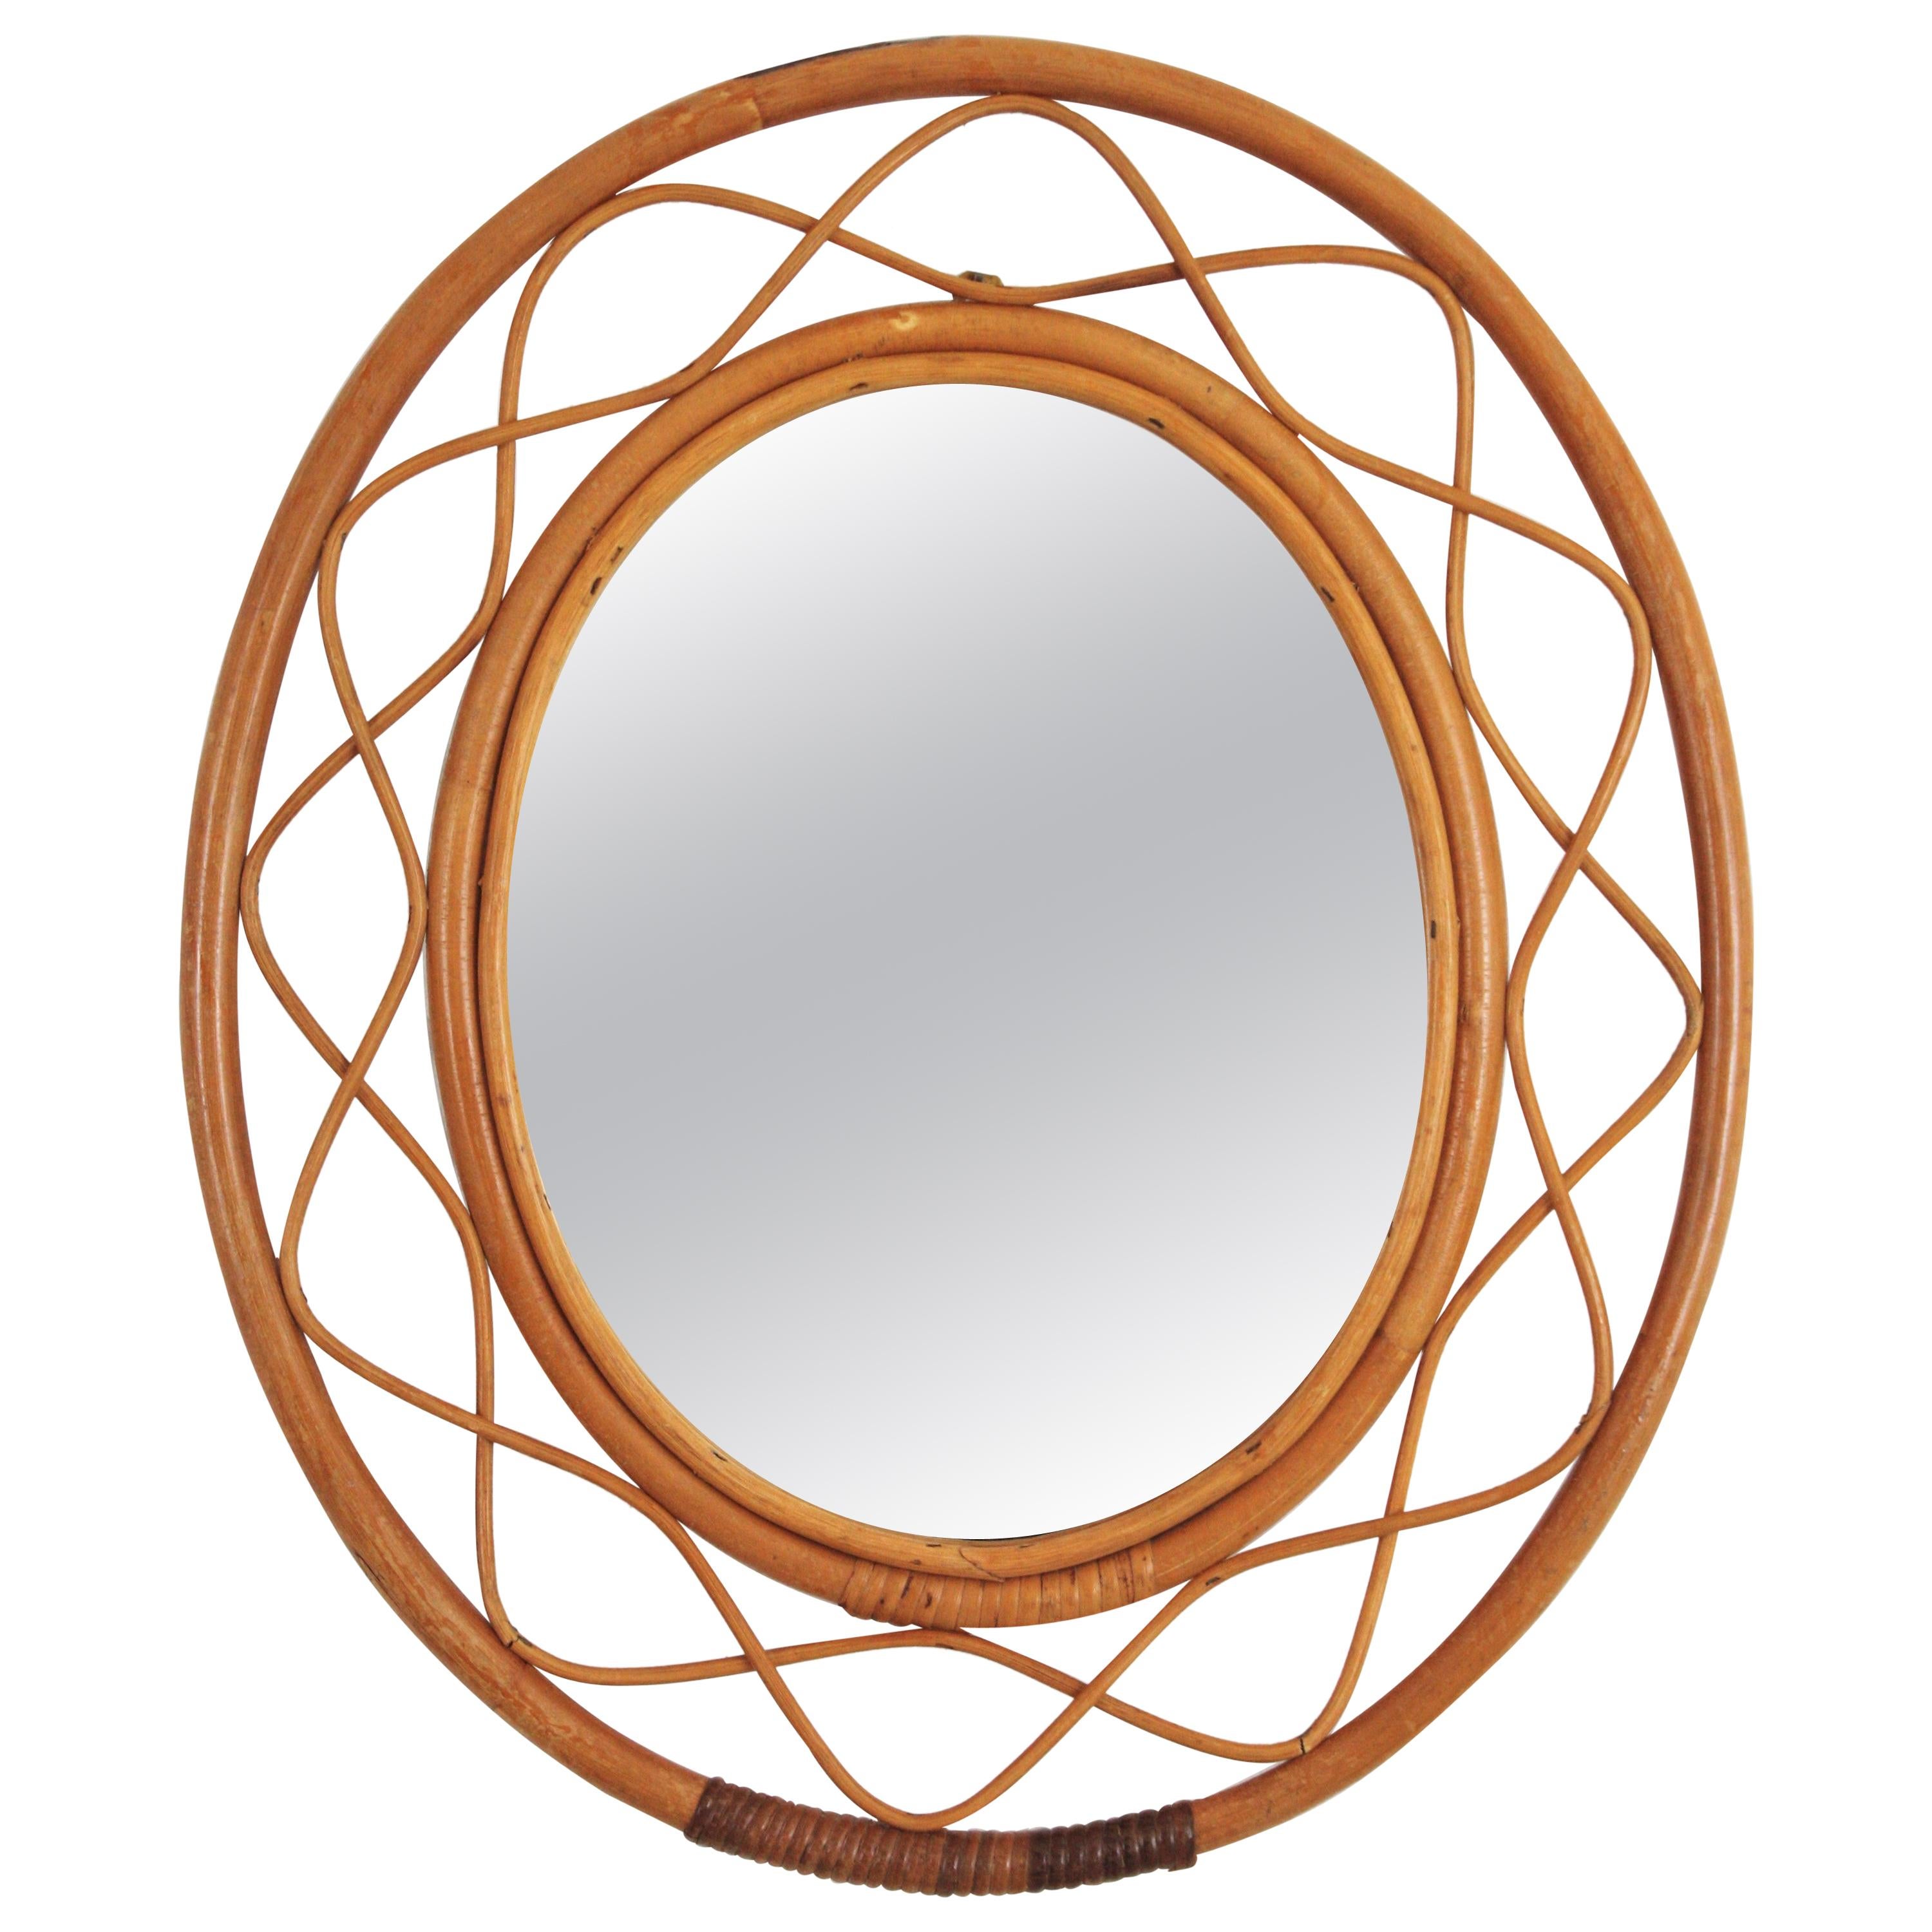 Midcentury Bamboo and Rattan Oval Mirror, France, 1960s